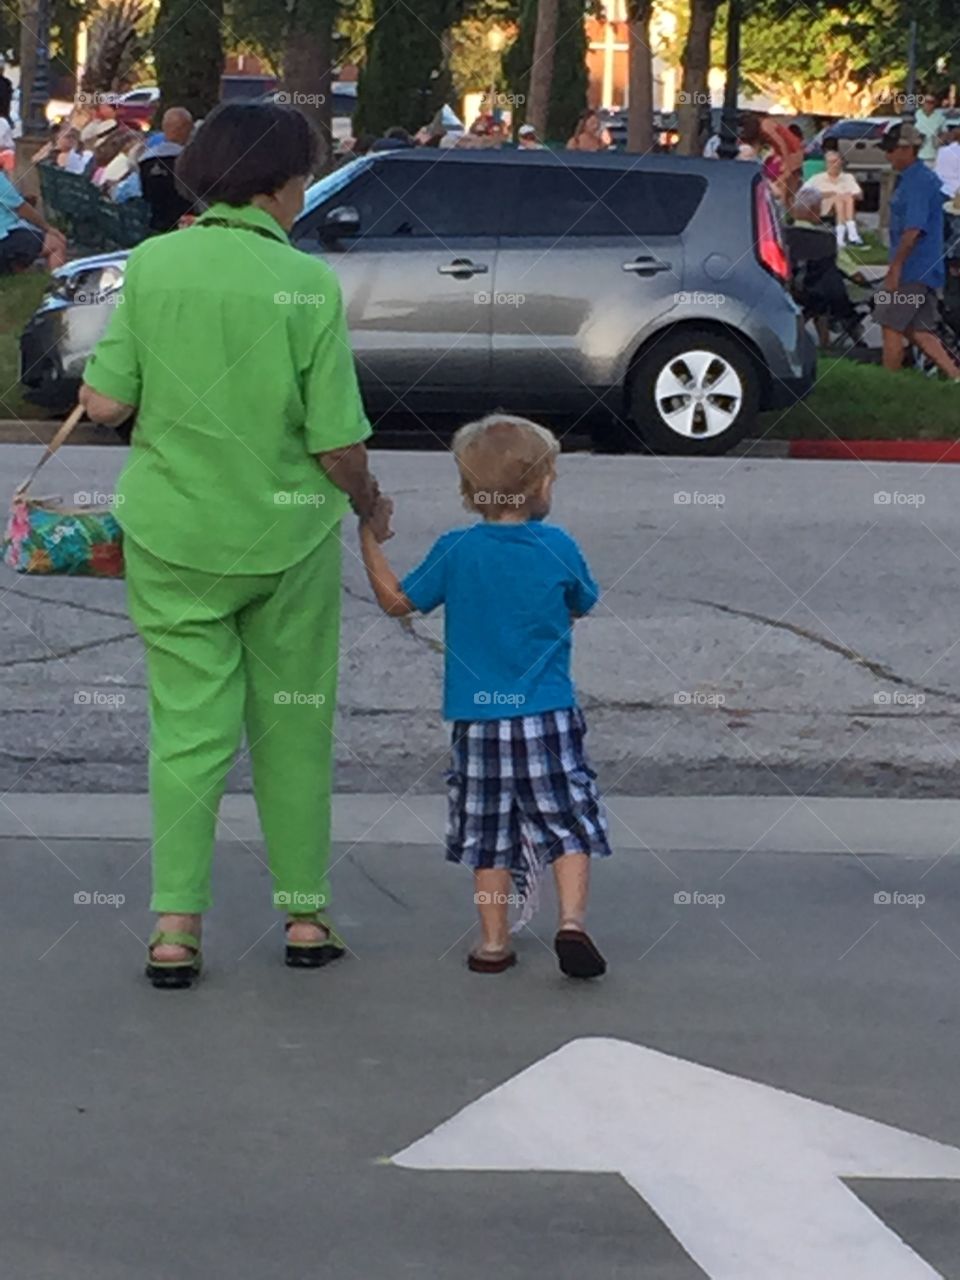 My Grandmother and nephew walking across the parking lot to go listen to the band concert in Galveston.